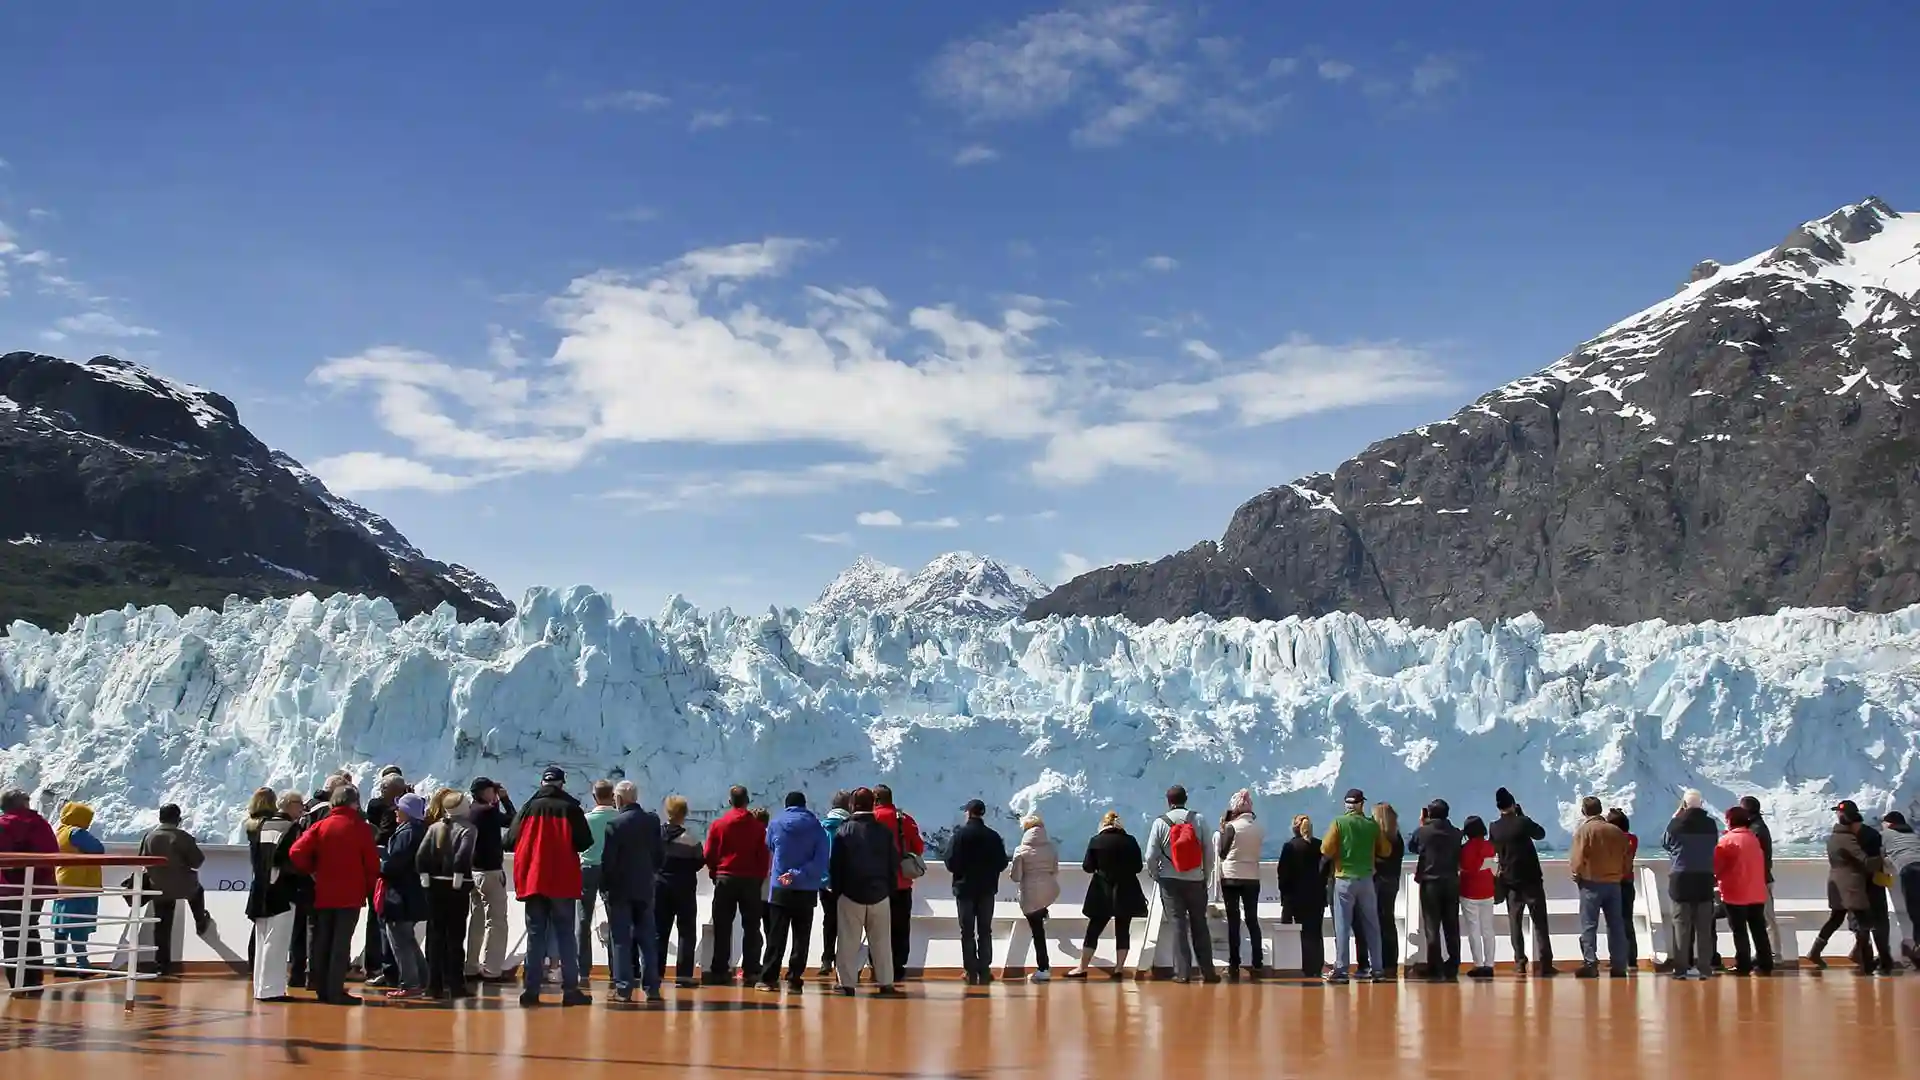 People on cruise deck viewing icy glacier beneath blue sky.